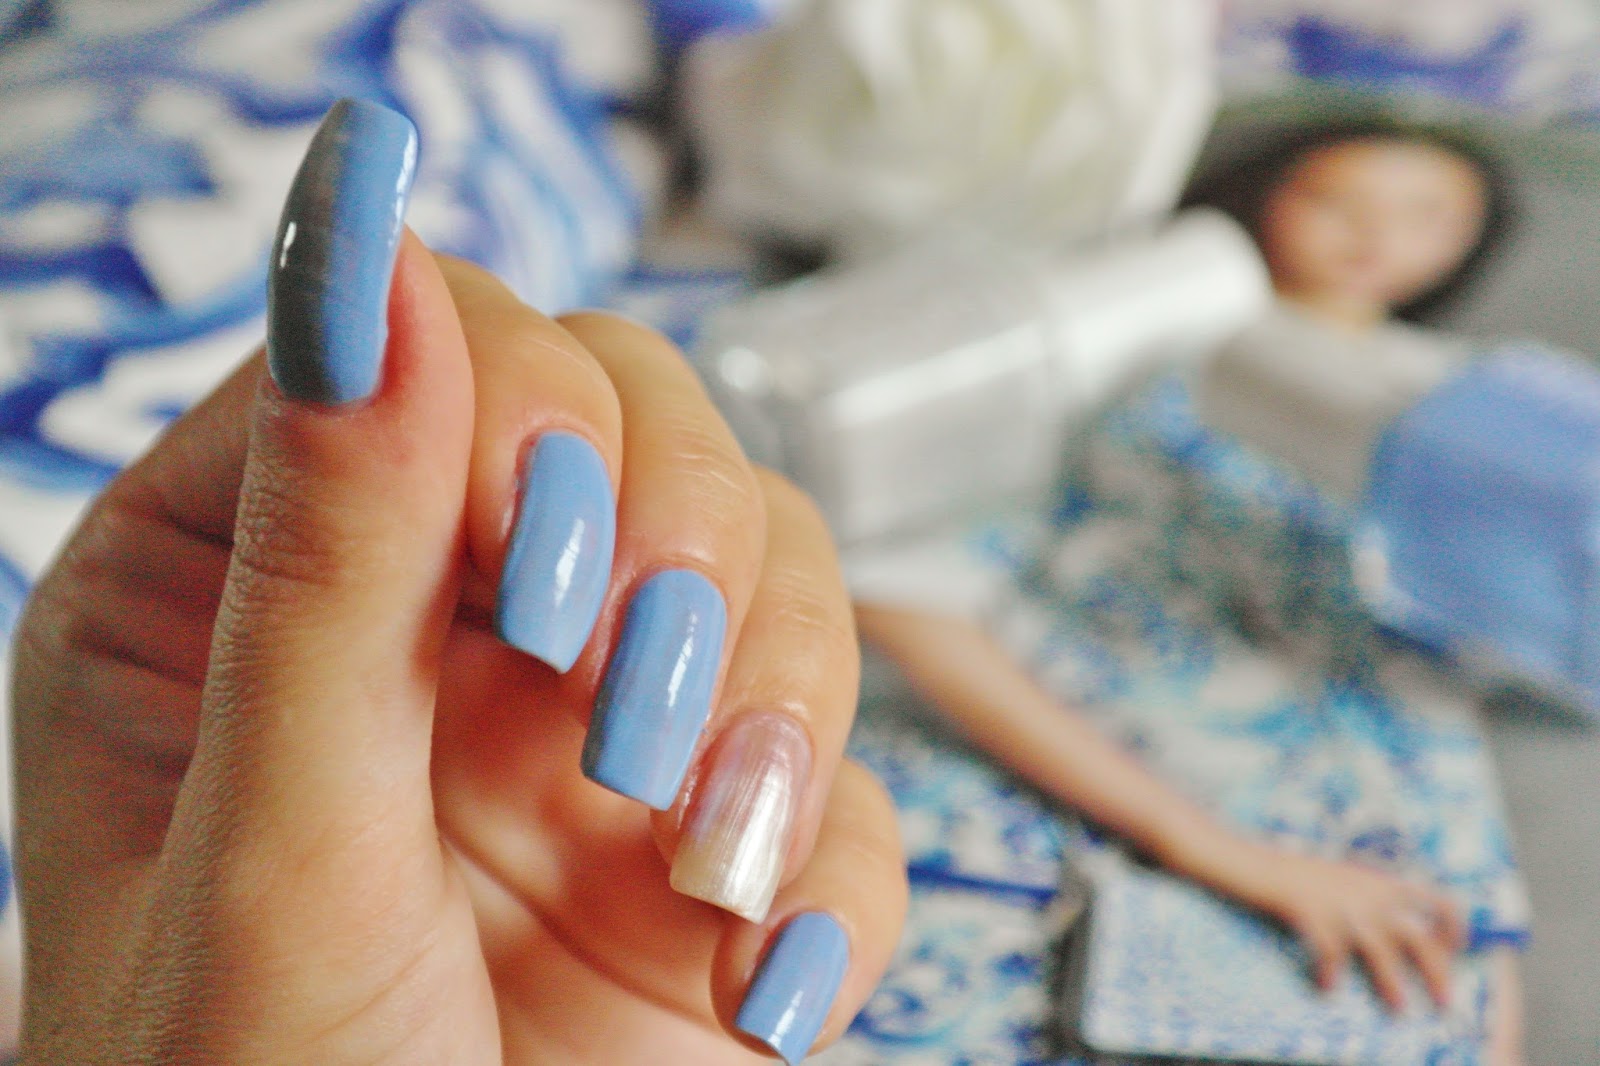 "Icy Blue Nails" - wide 3